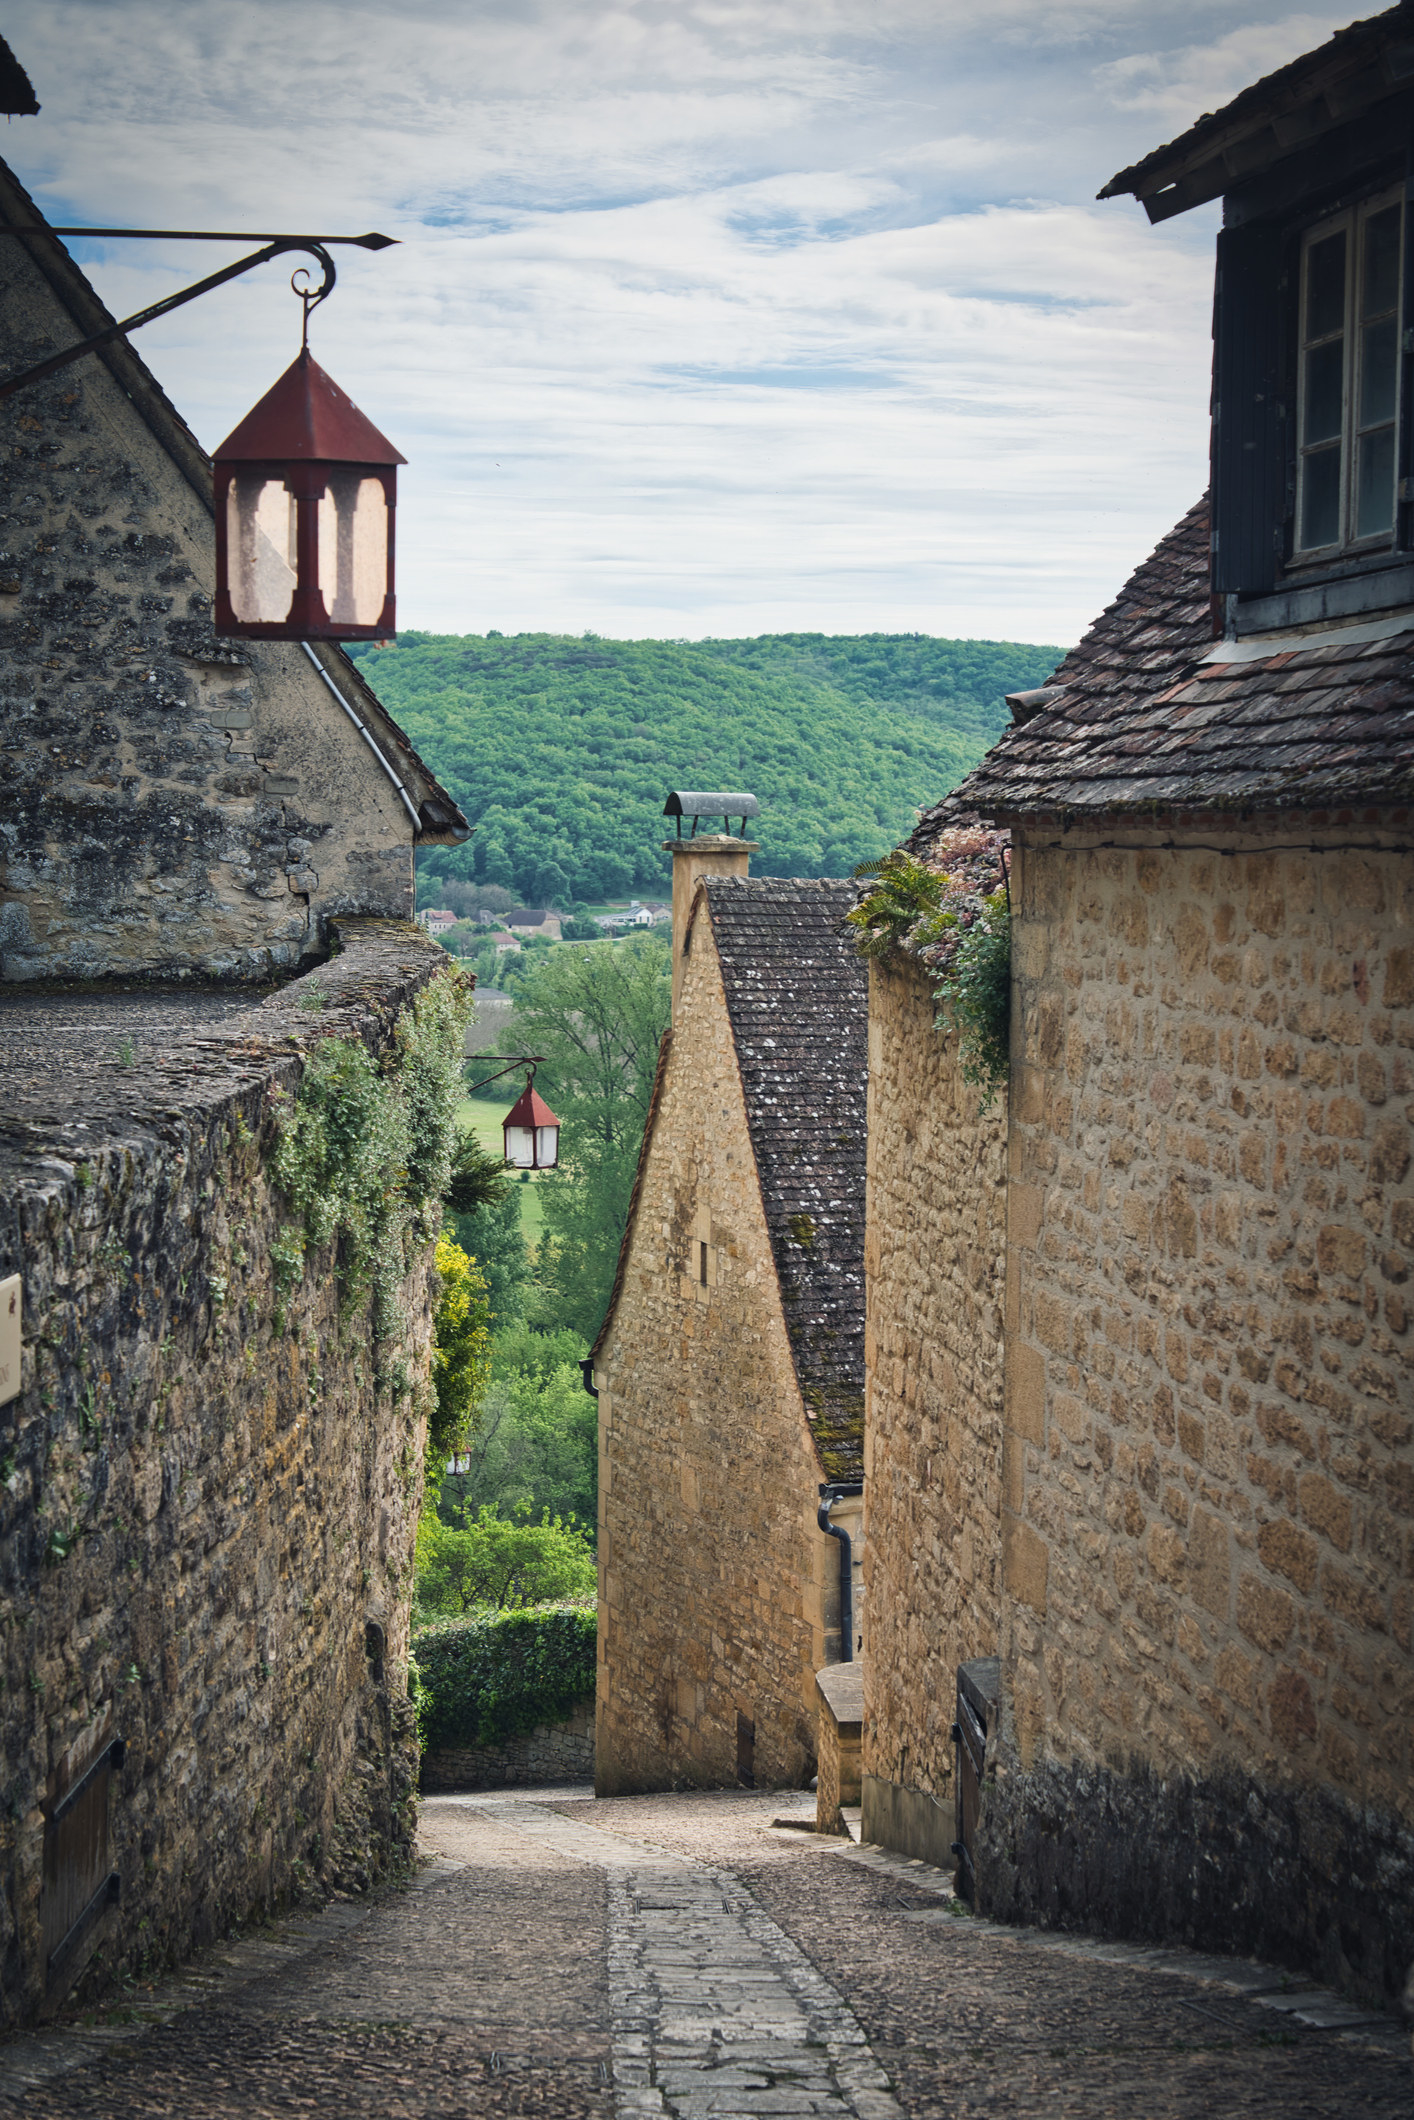 A French village in the countryside